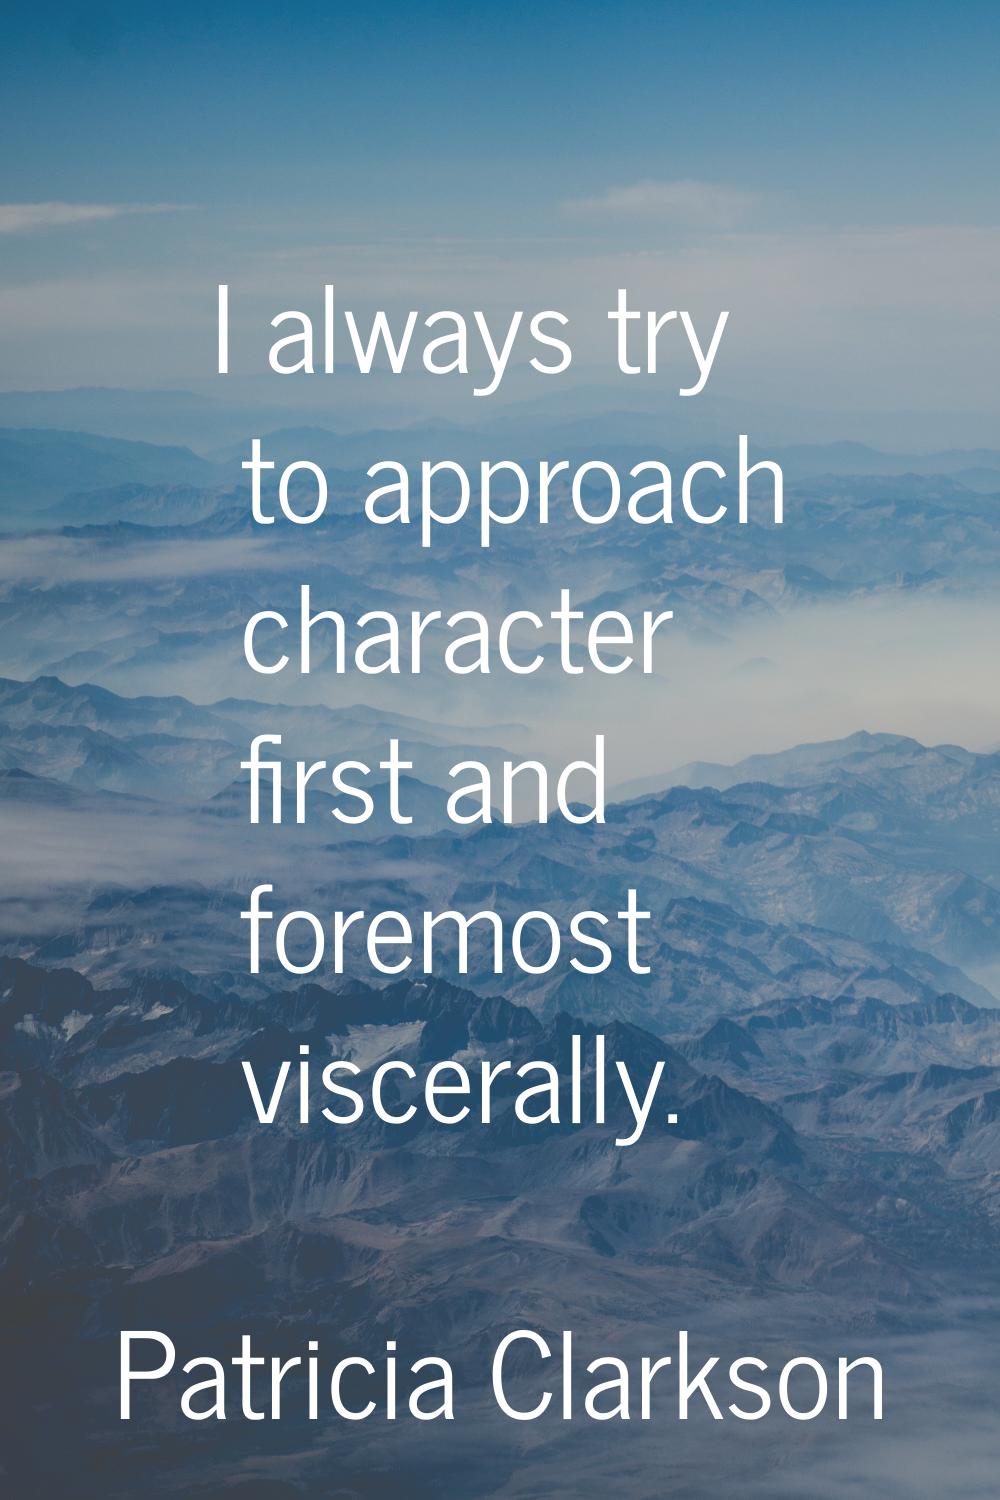 I always try to approach character first and foremost viscerally.